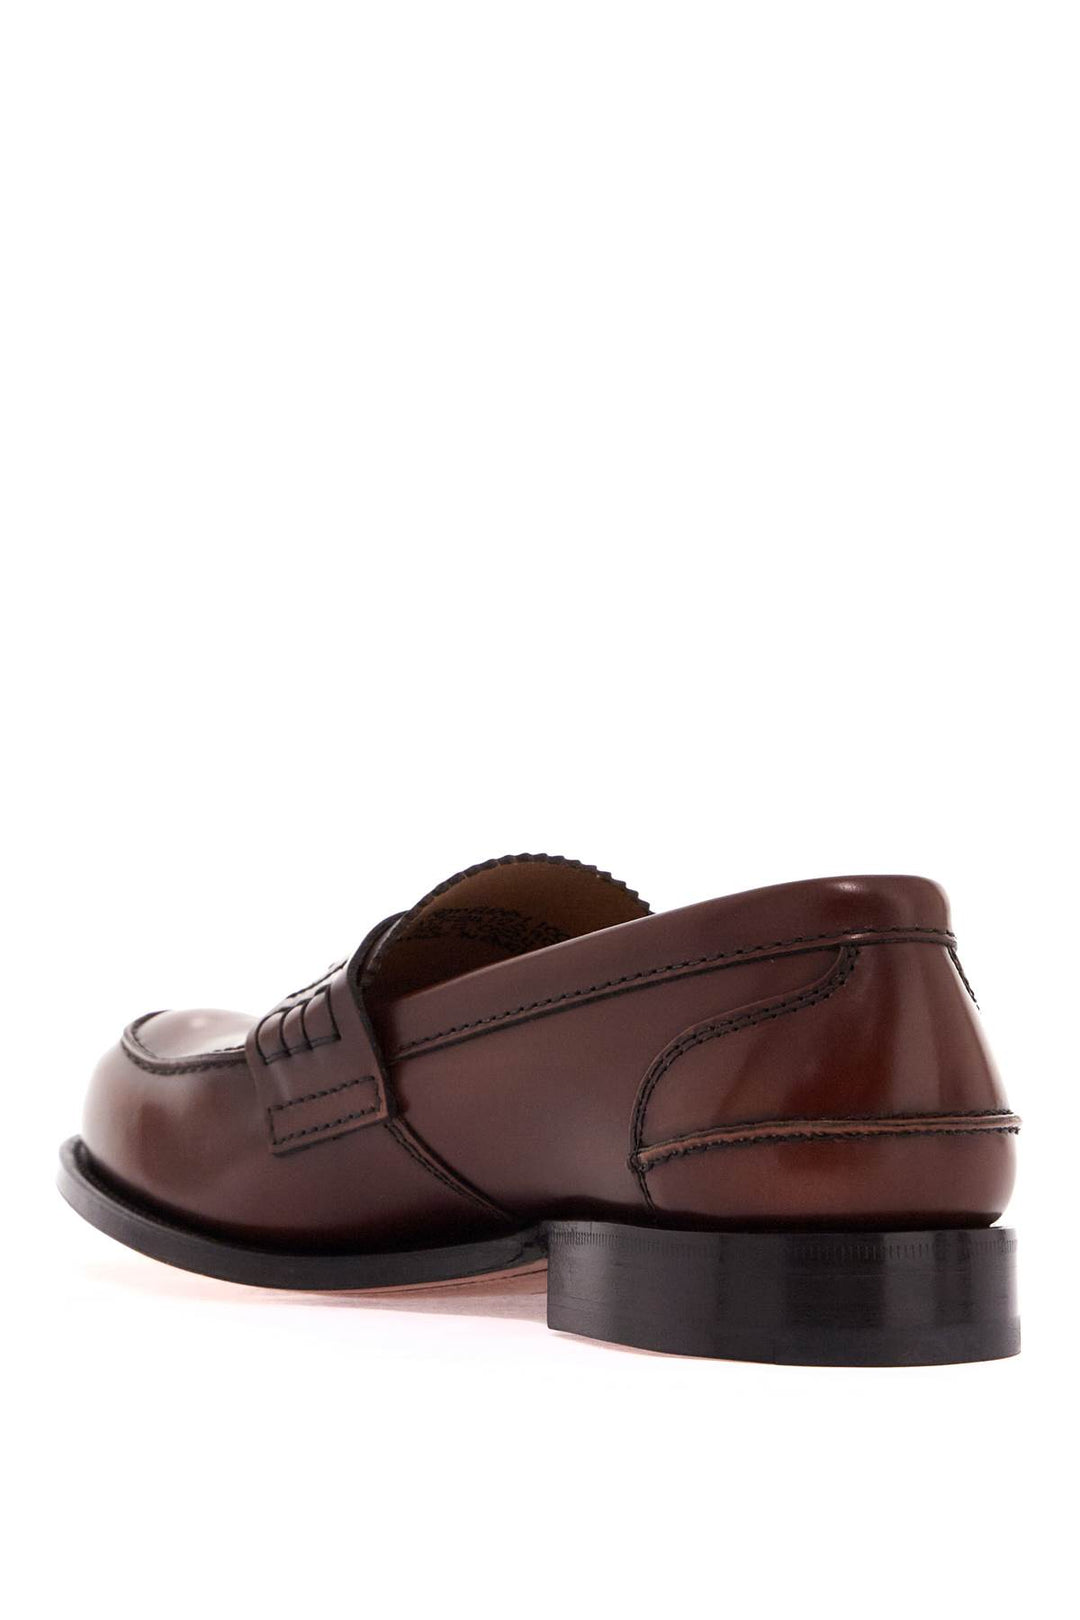 Church's Pembrey Glossy Leather Loafers   Brown